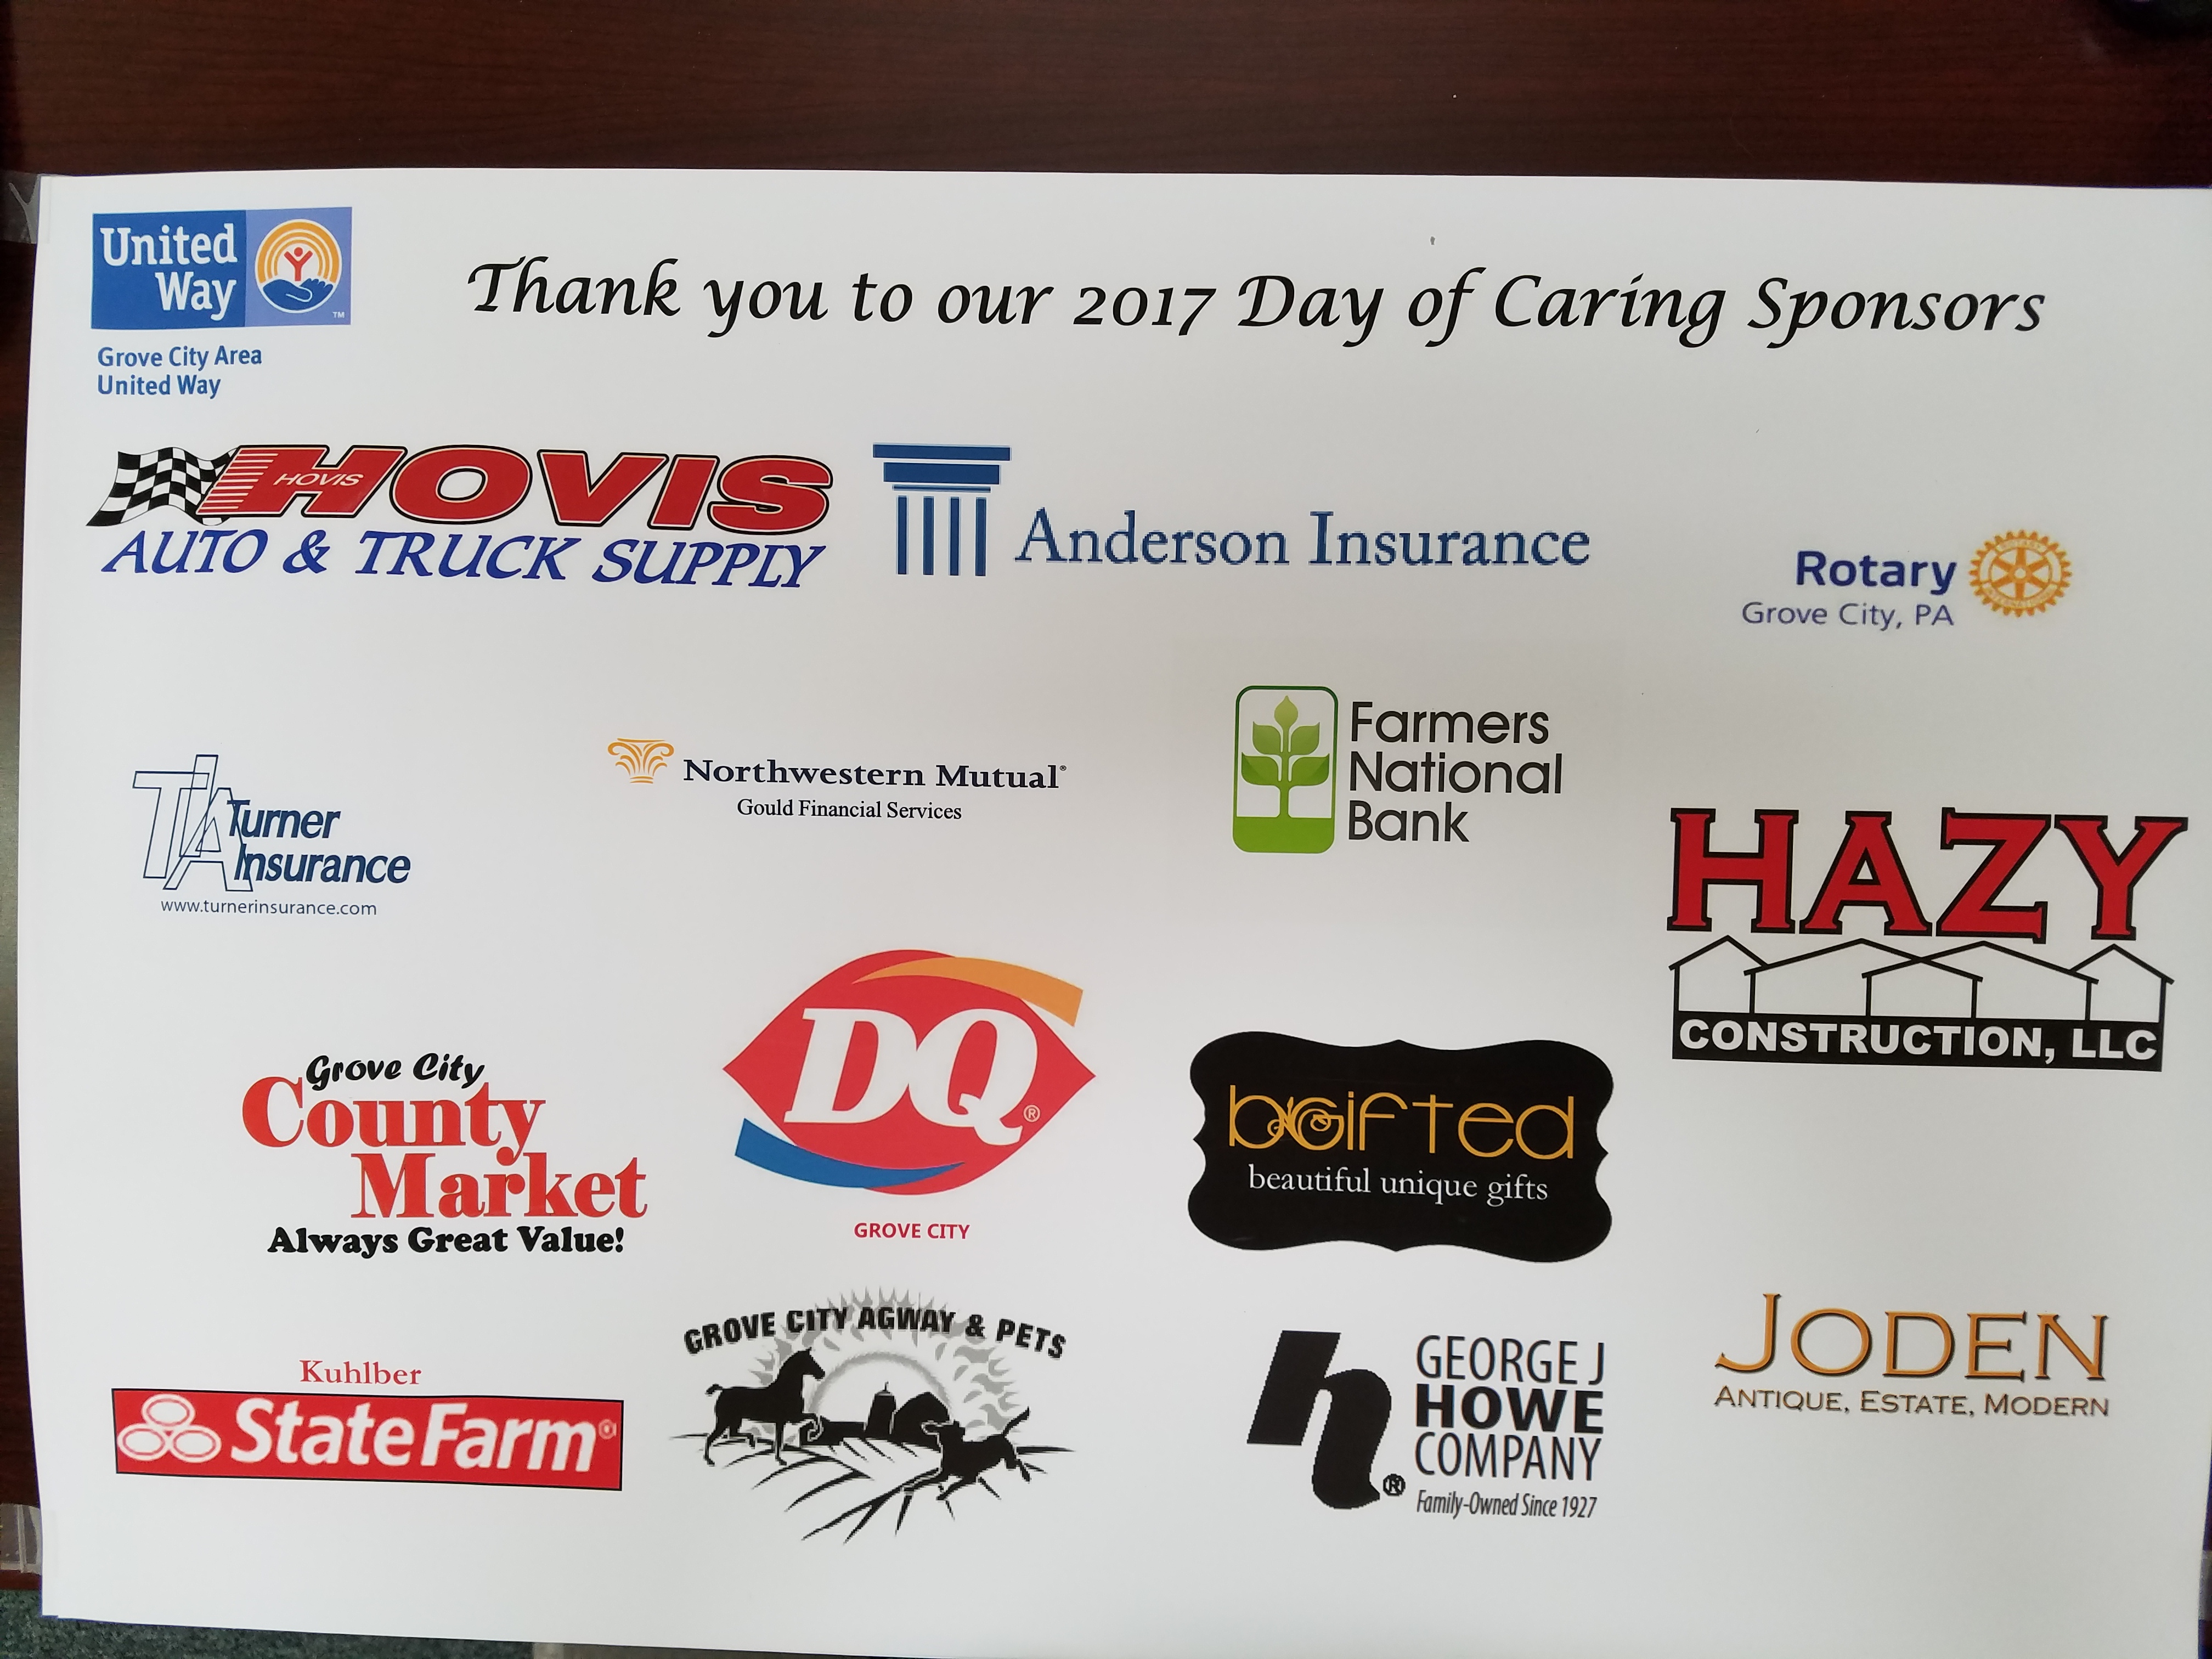 Many thanks to our Day of Caring Sponsors!